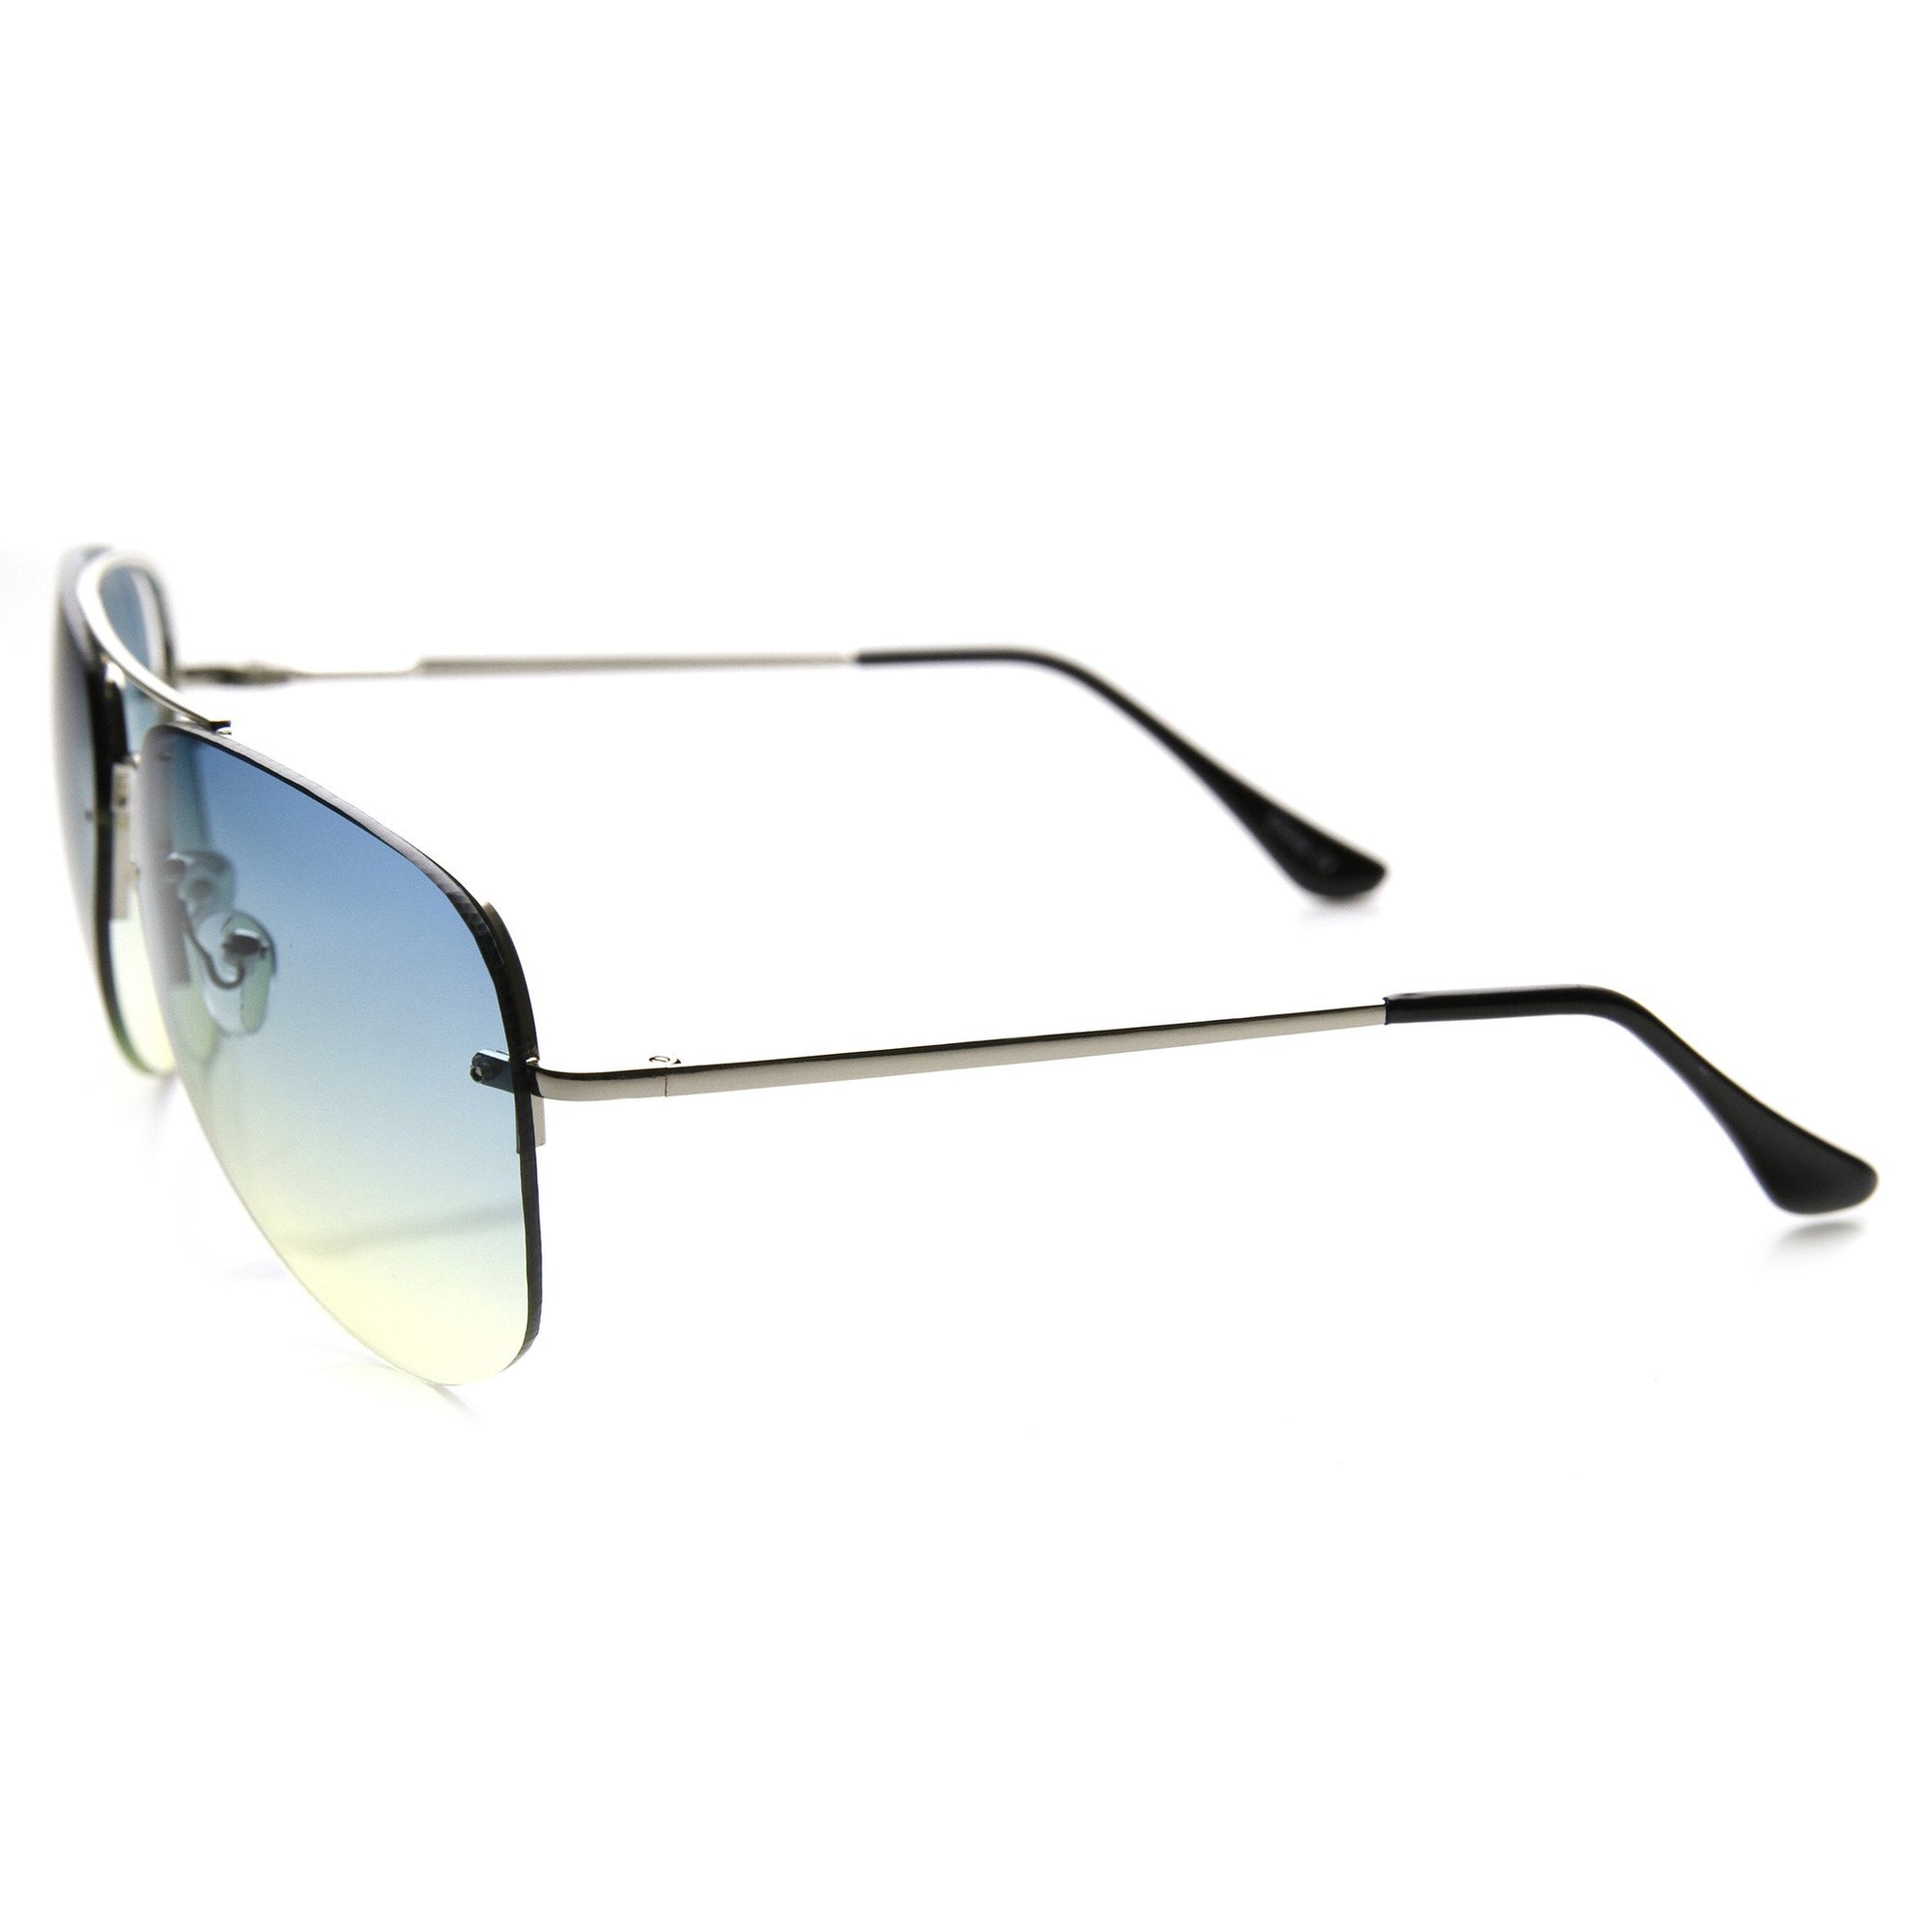 Ray-Ban aviator sunglasses in silver with blue fade lens